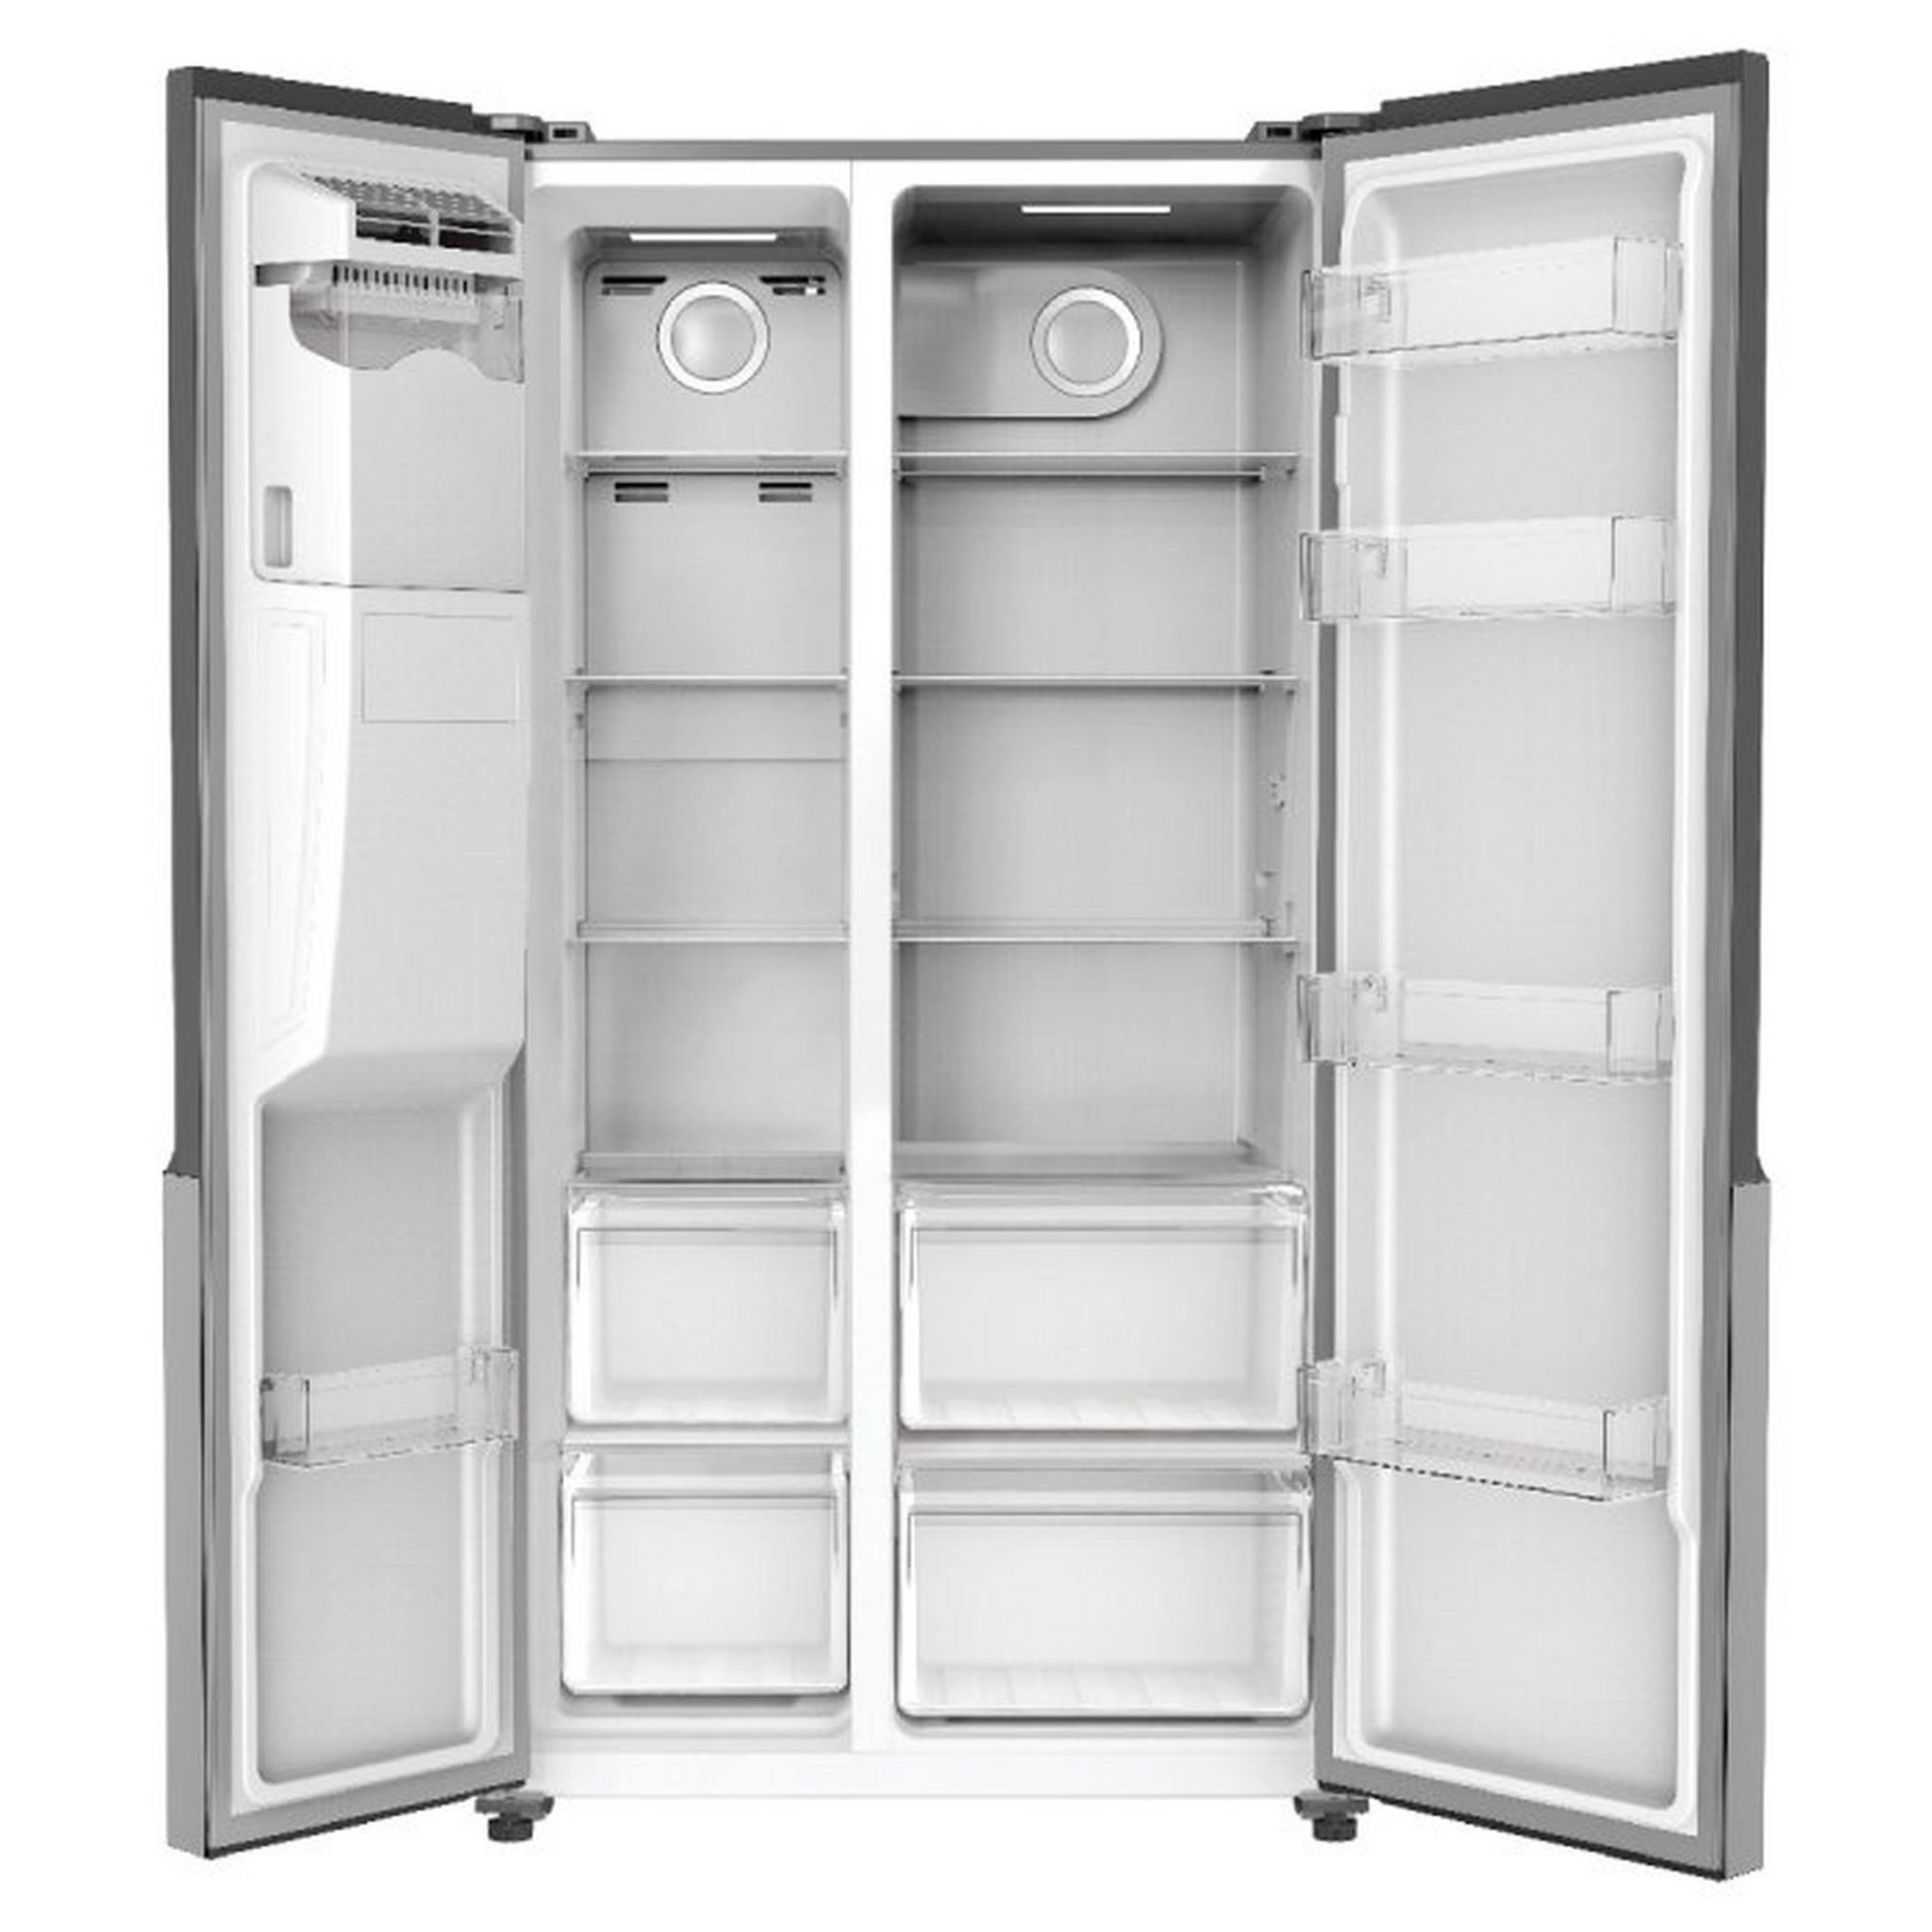 Wansa 20 Cft Side By Side Refrigerator and Freezer Stainless Steel (WRSG-563-NFSSC82)